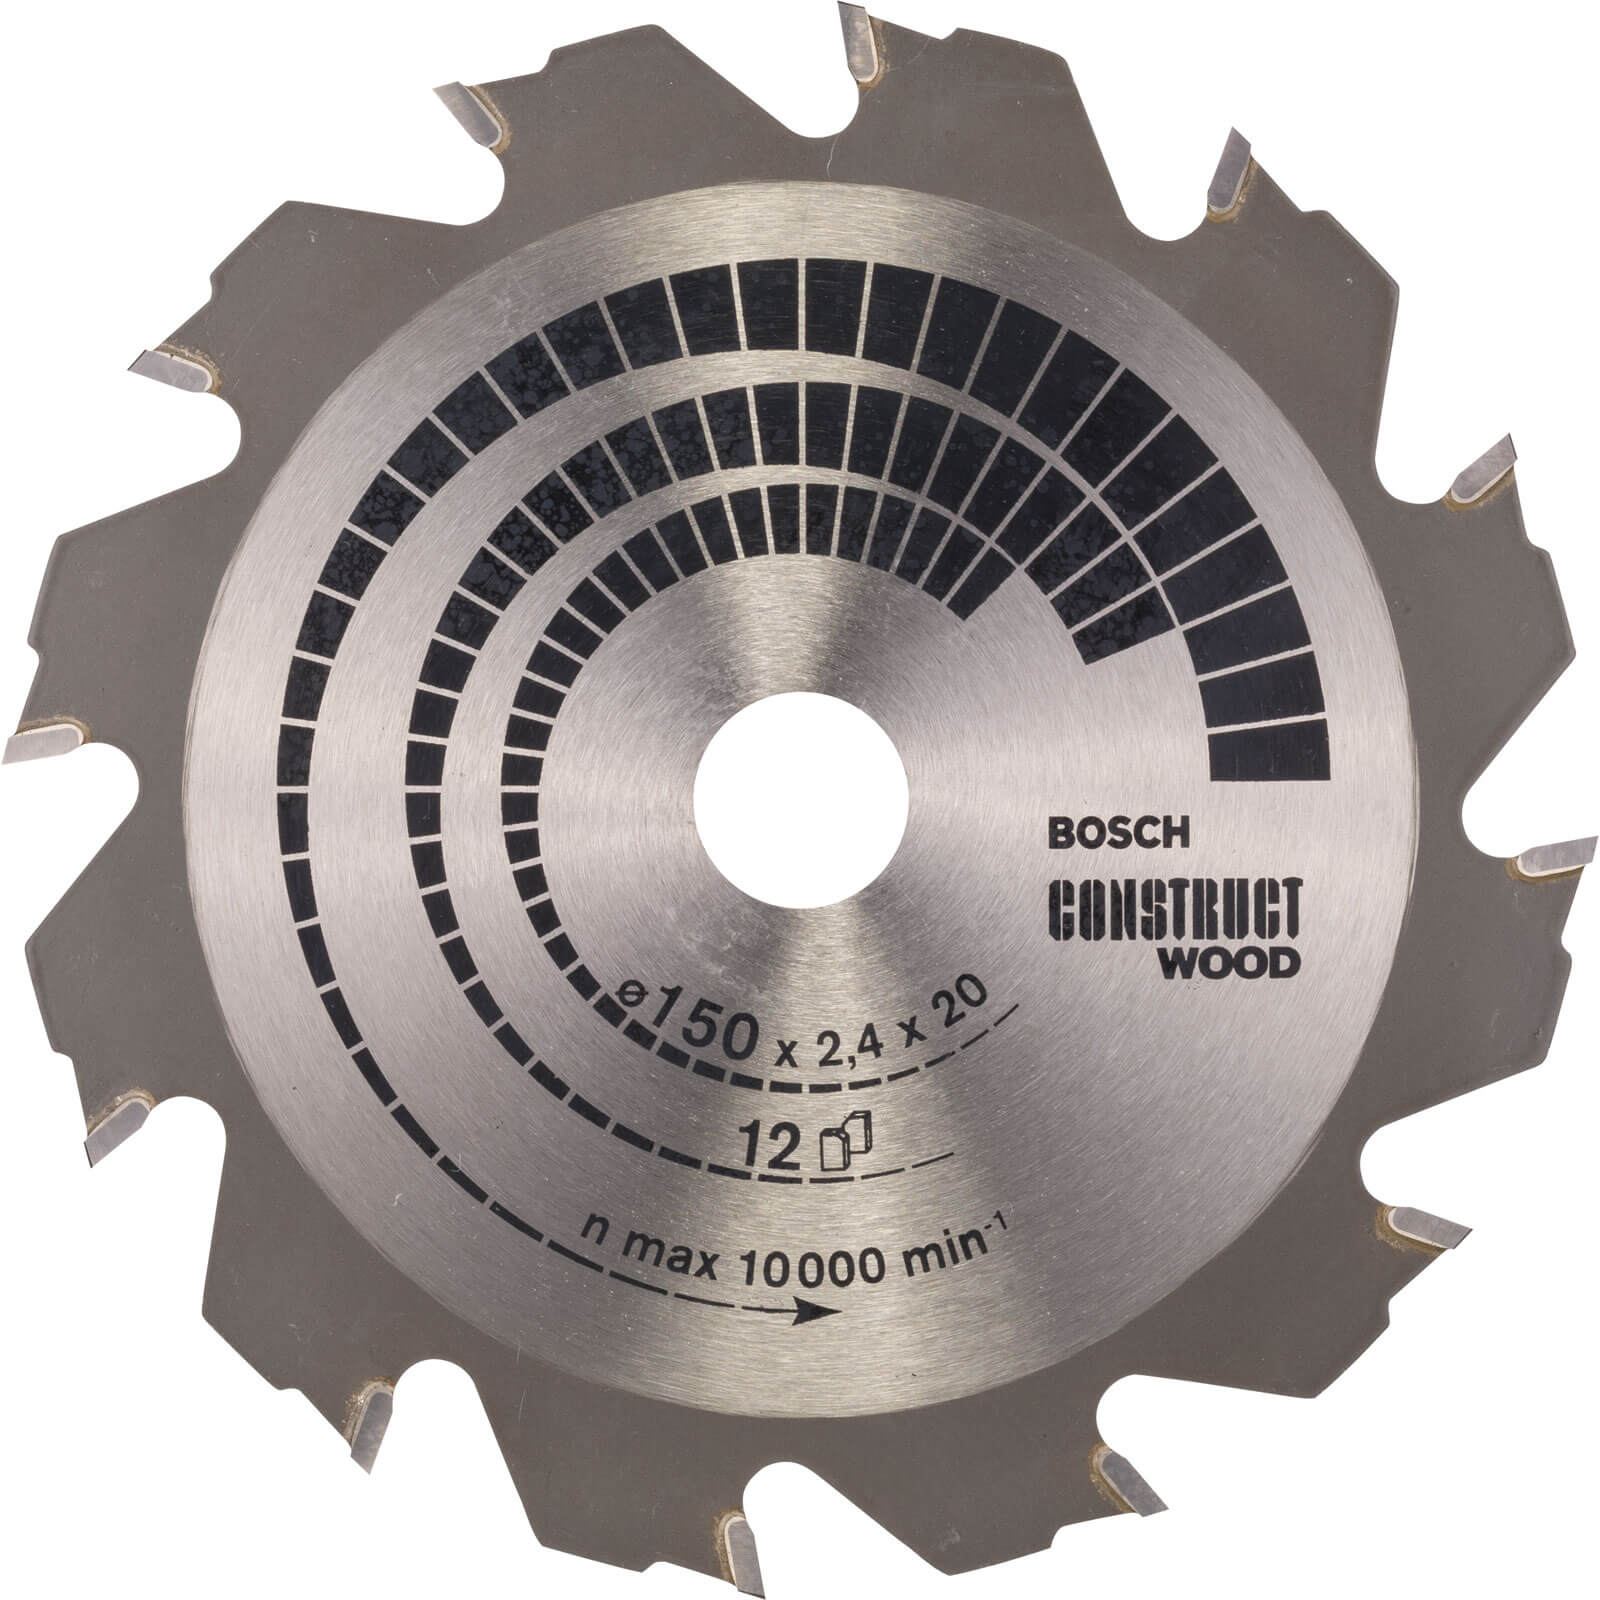 Photos - Power Tool Accessory Bosch Construct Wood Cutting Saw Blade 150mm 12T 20mm 